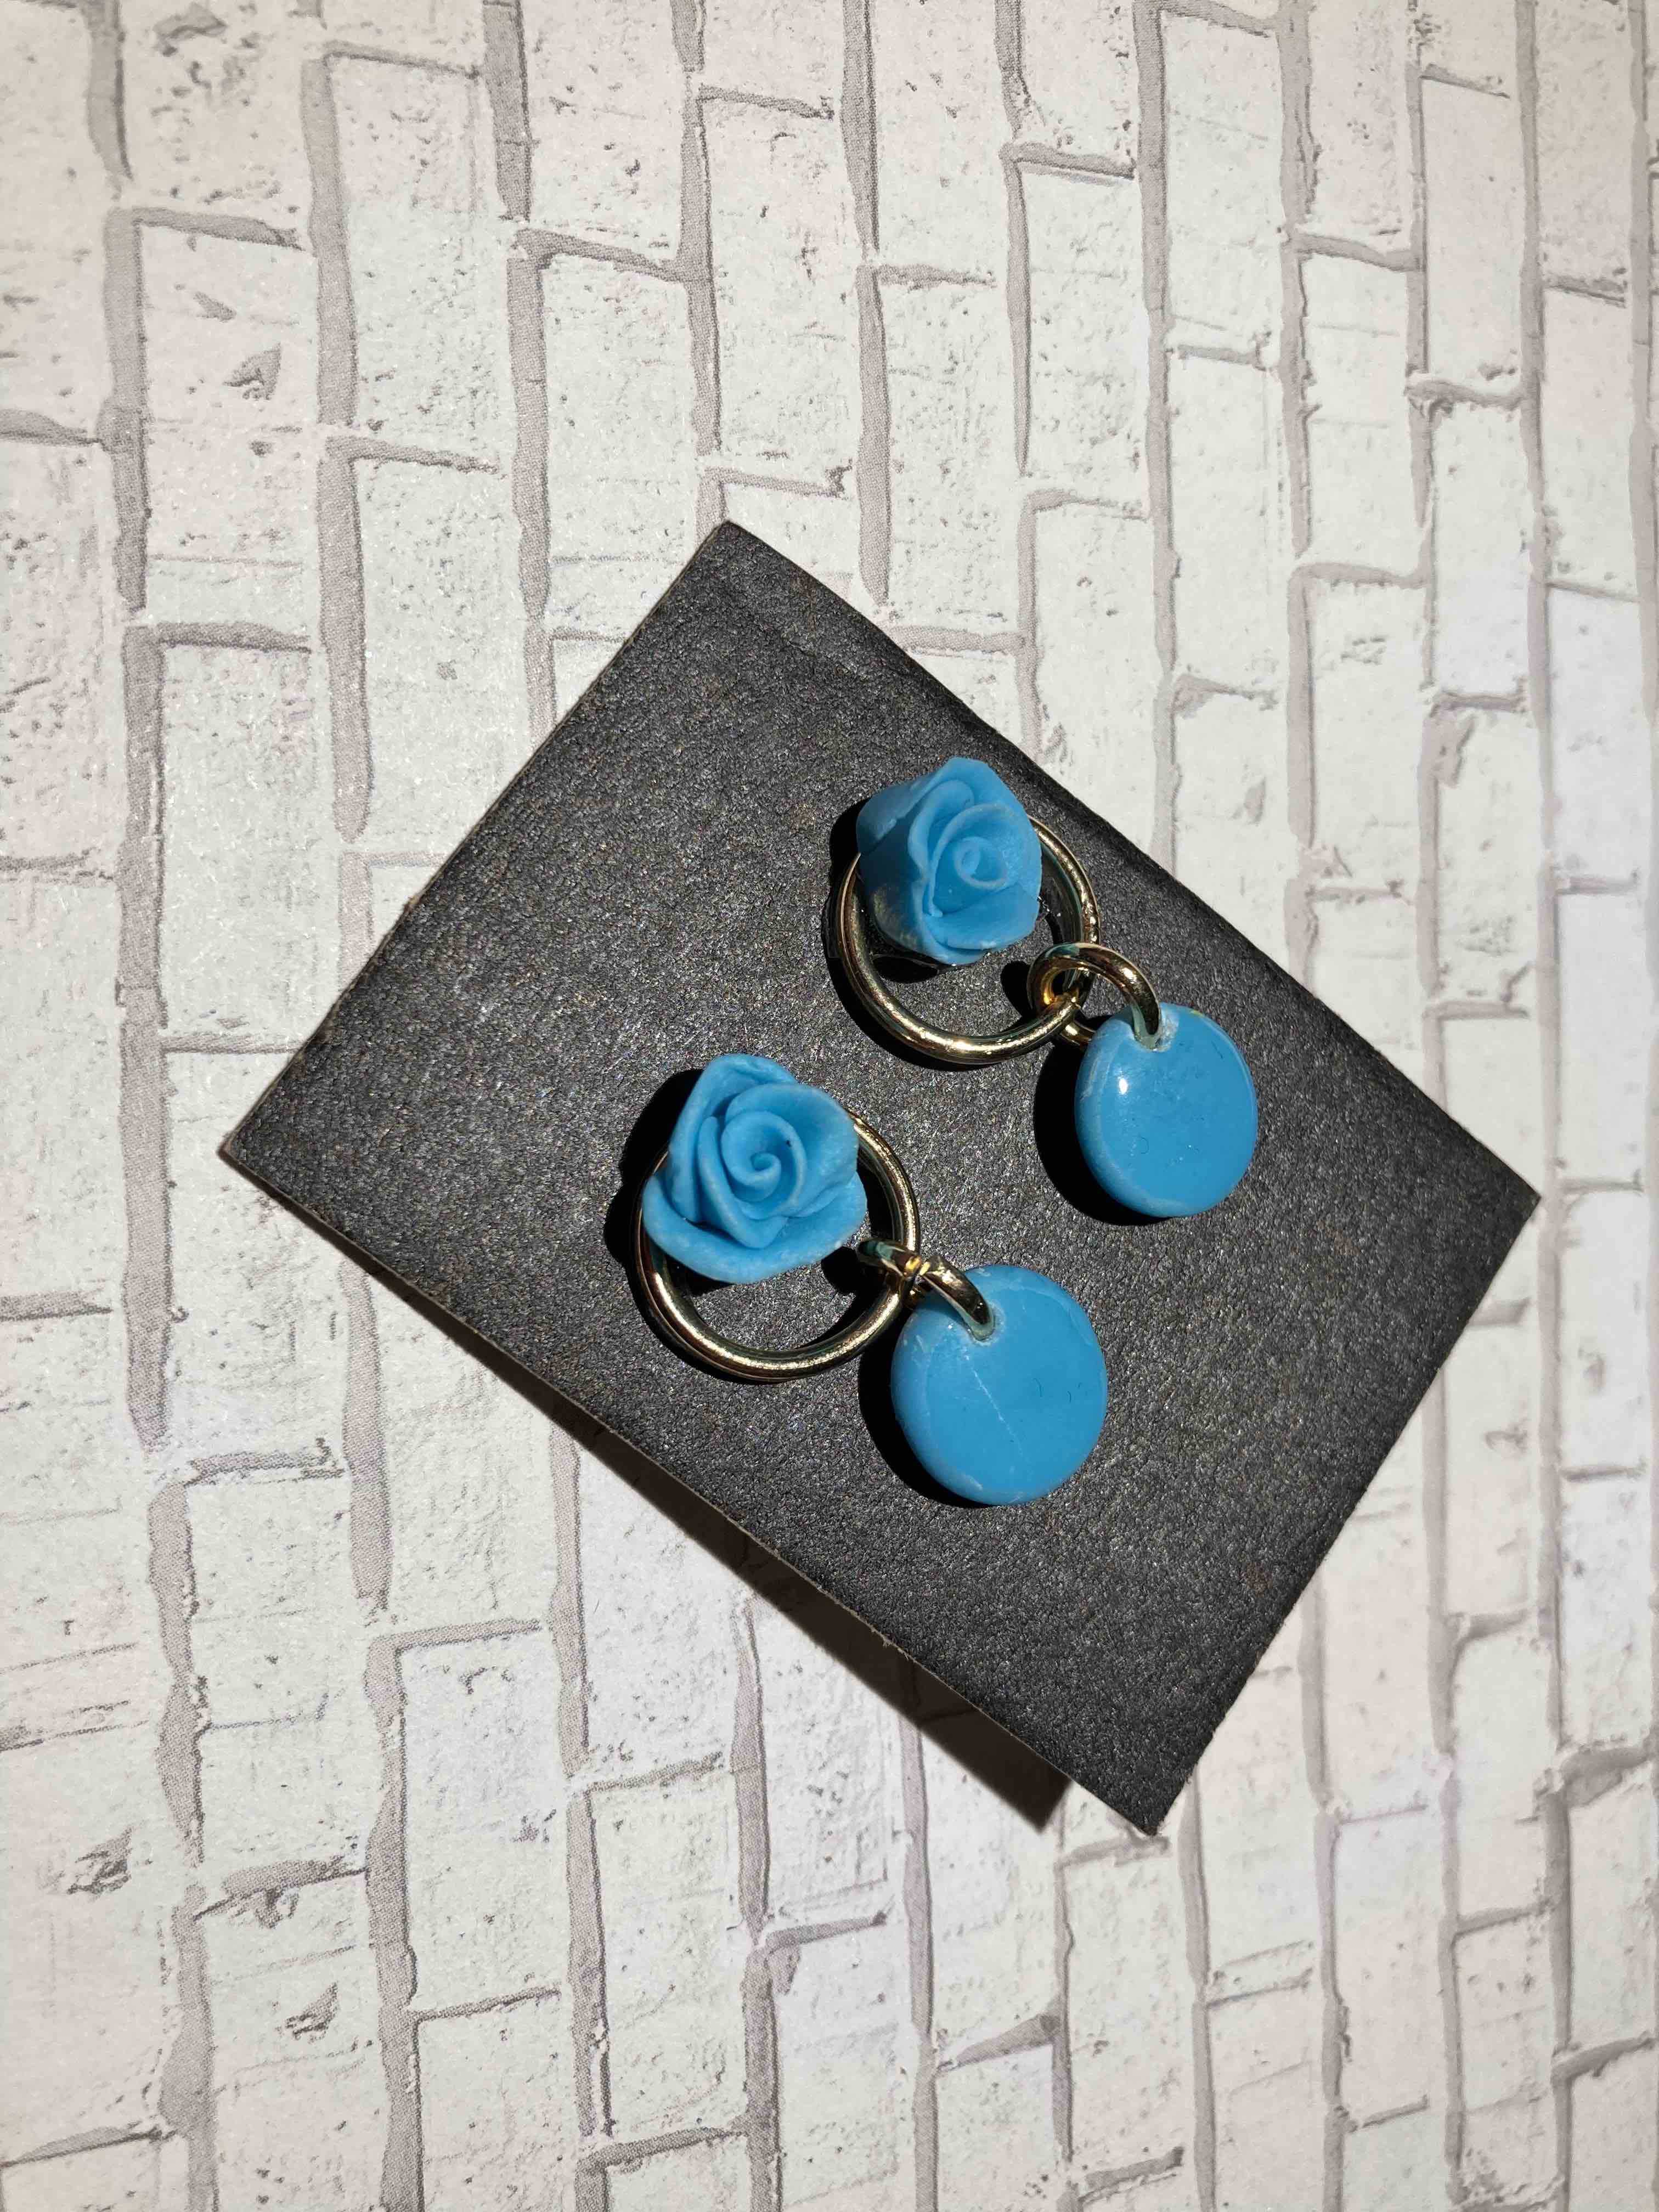 Lovely Baby Blue Roses with Gold Hoops | Baby blue polymer roses with gold posts, resin coating and gold hoops. Nickel free brass.